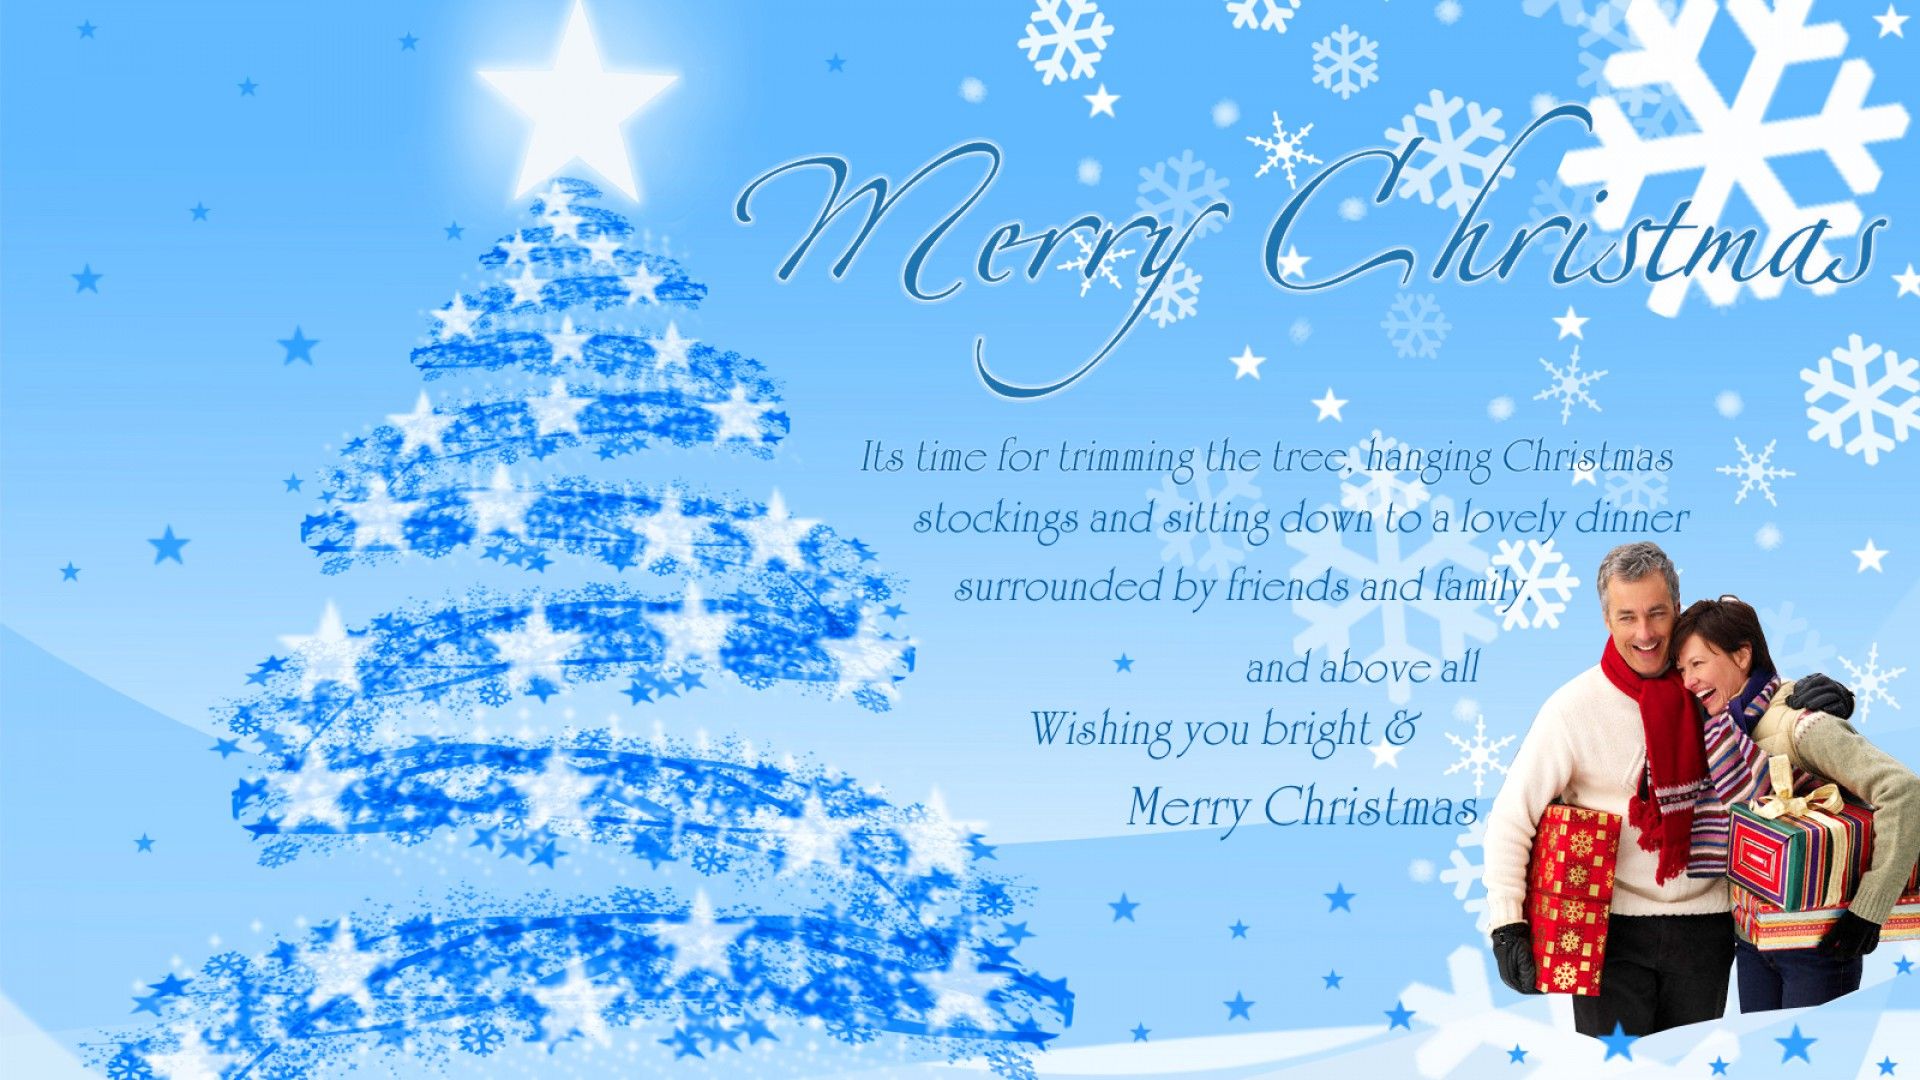 Download Free Christmas Picture For Facebook Twitter Picture Of Christmas Wallpaper & Background Download